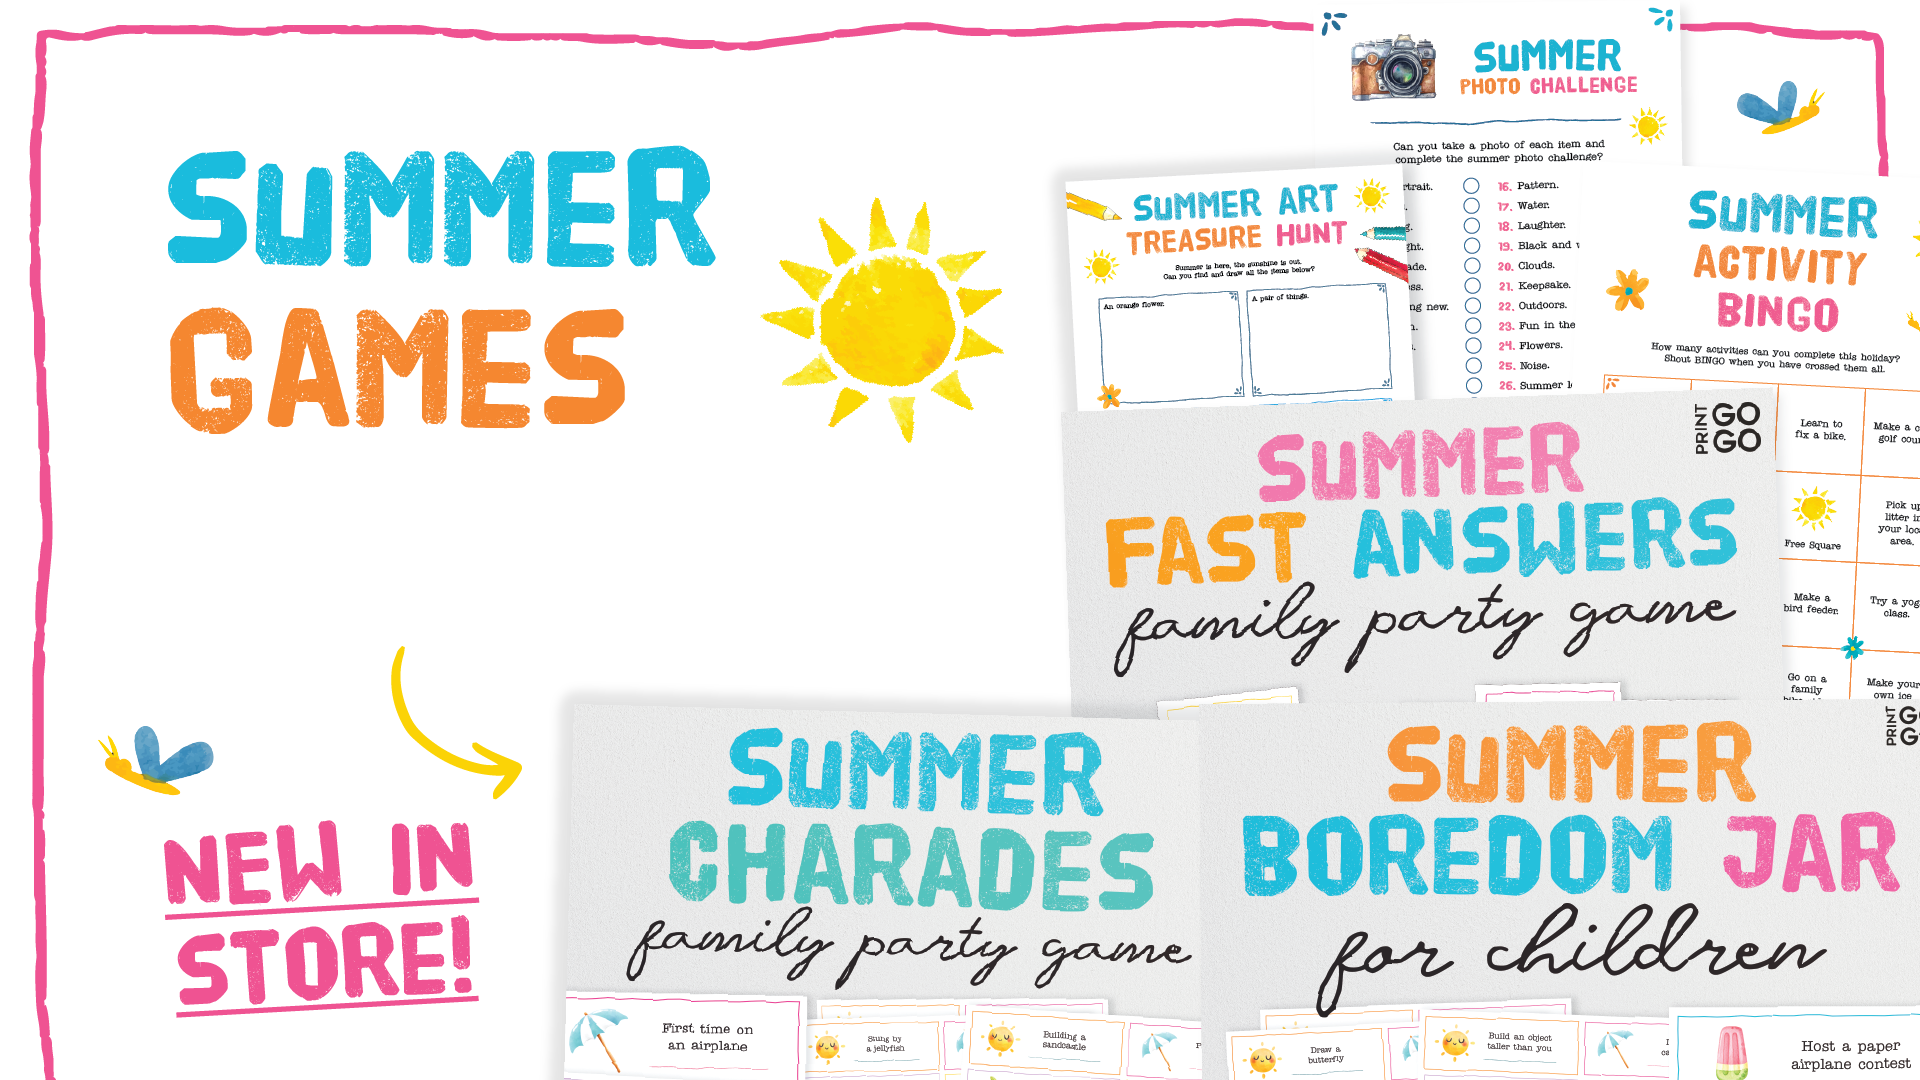 Banish the phrase "I'm Bored" and keep the kids occupied this summer. From boredom cards, photo challenges, treasure hunts, creative games, DIY escape rooms and more.